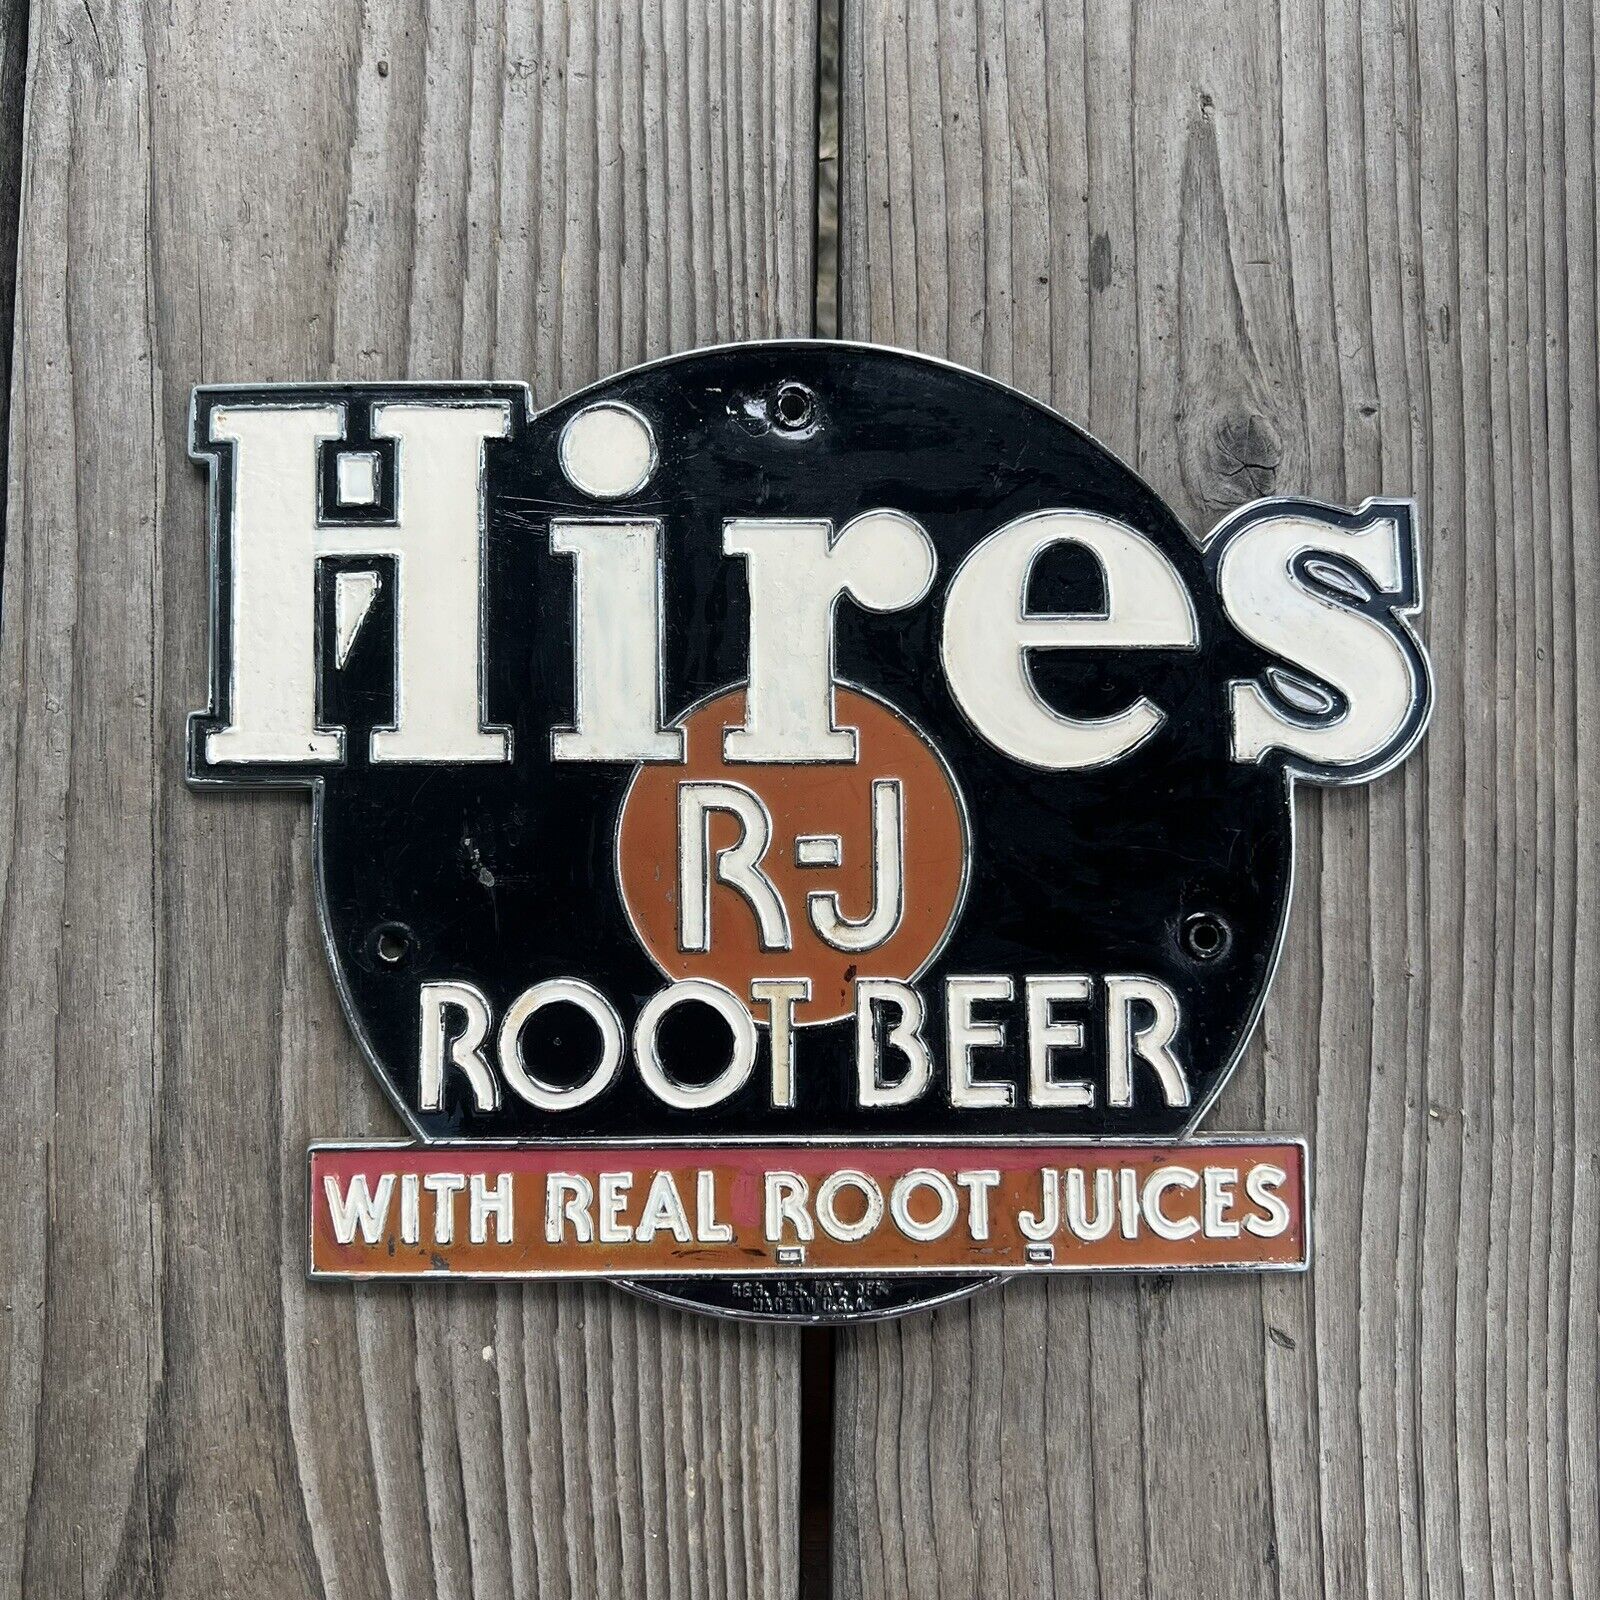 Hires R-J Root Beer Vintage Sign 40s-50s Embossed 6” x 7.5” Great Condition USA